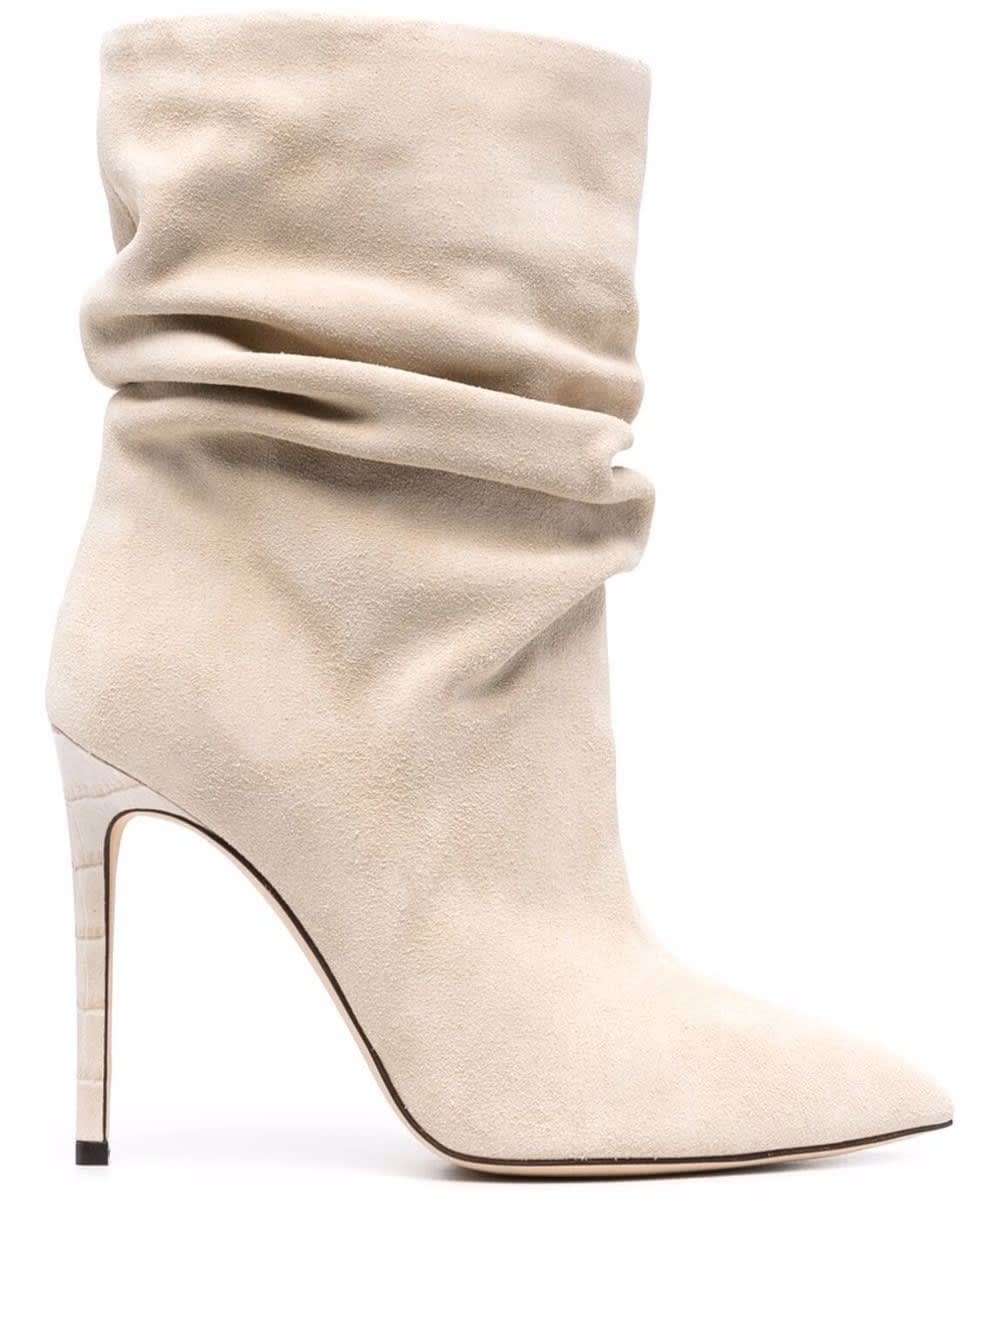 Ivory Boots In Suede With Stiletto Heel Paris Texas Woman